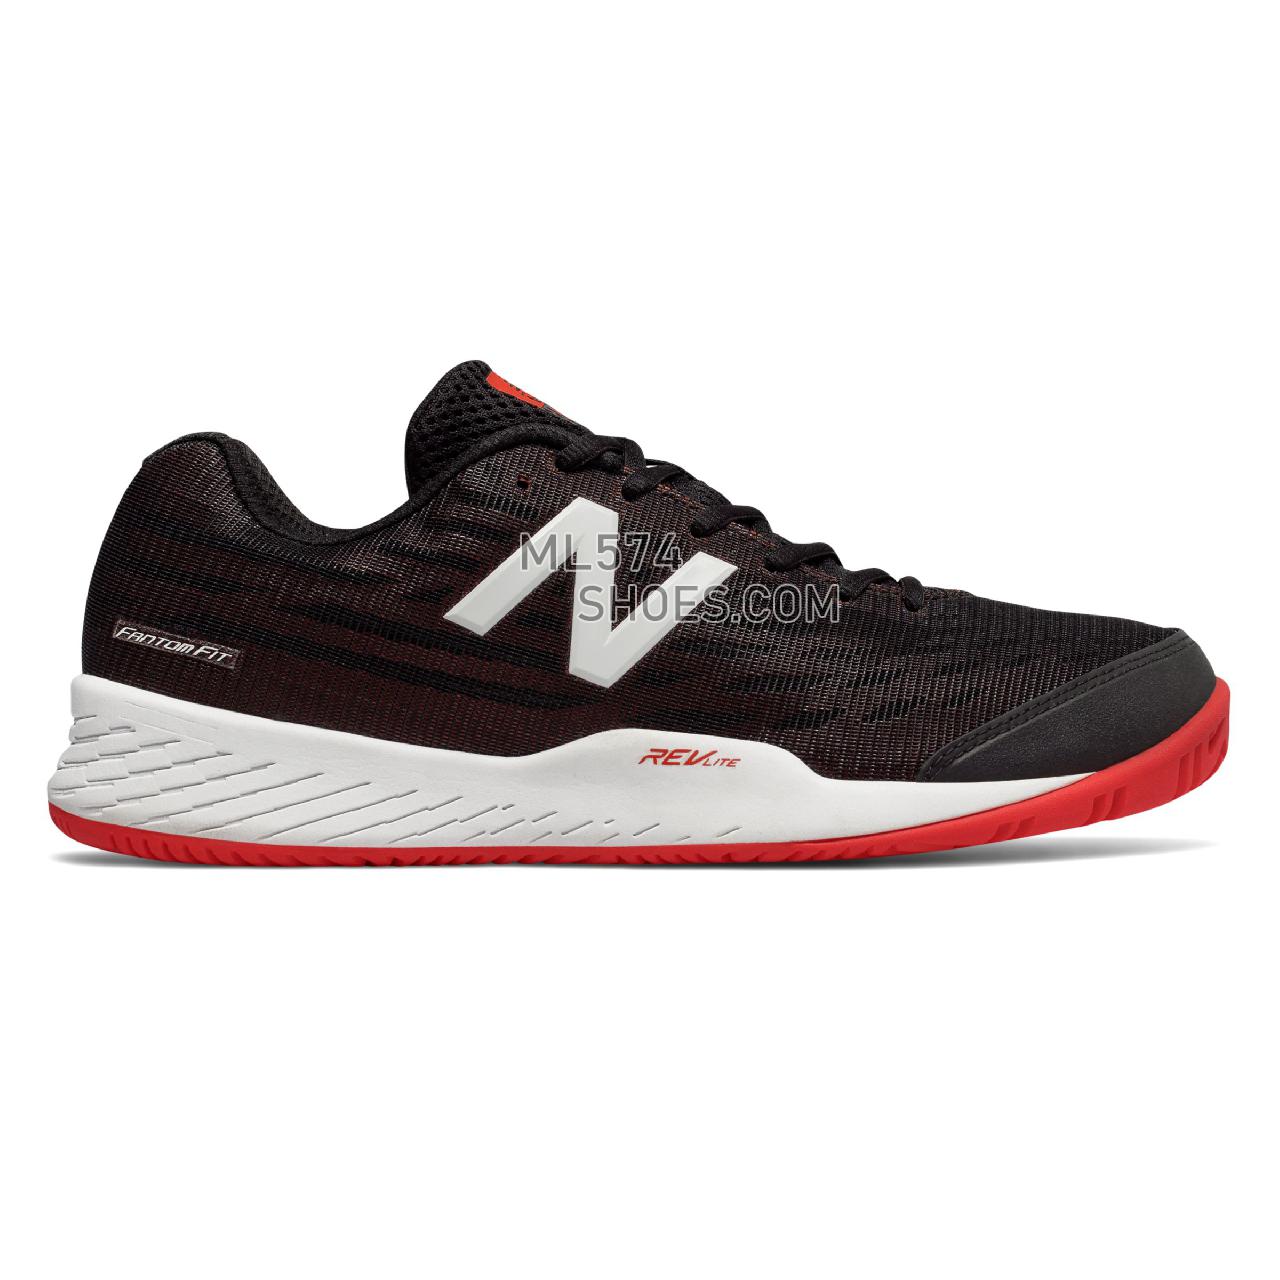 New Balance 896v2 - Men's 896 - Tennis / Court Black with Flame and White - MCH896F2